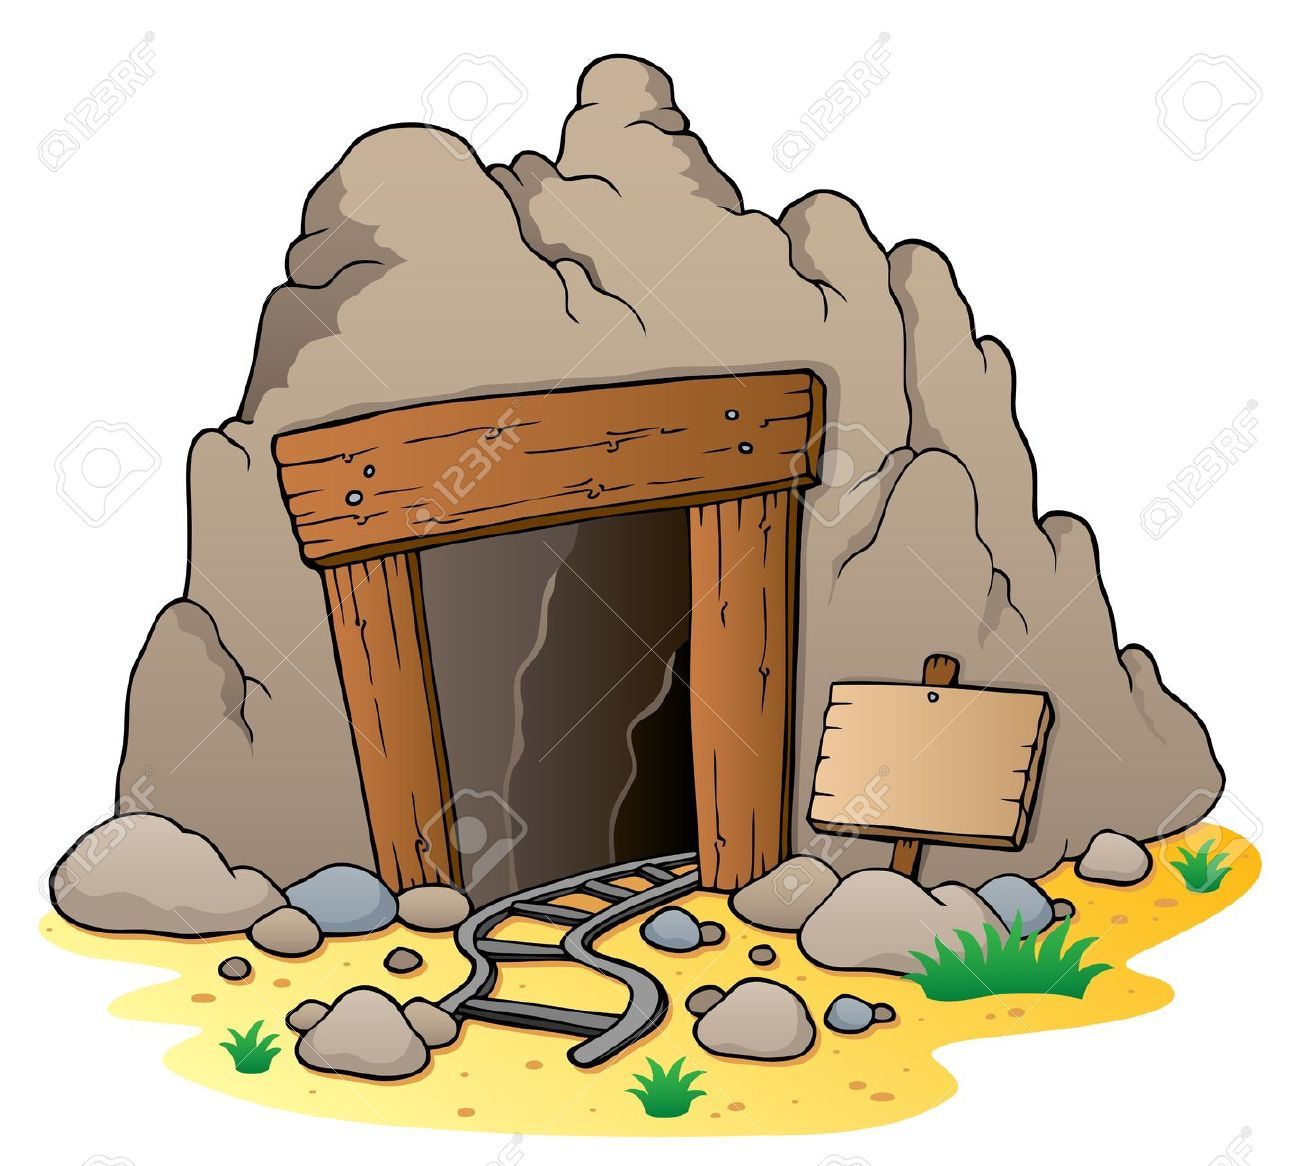 Rock Cave Cliparts, Stock Vector And Royalty Free Rock Cave